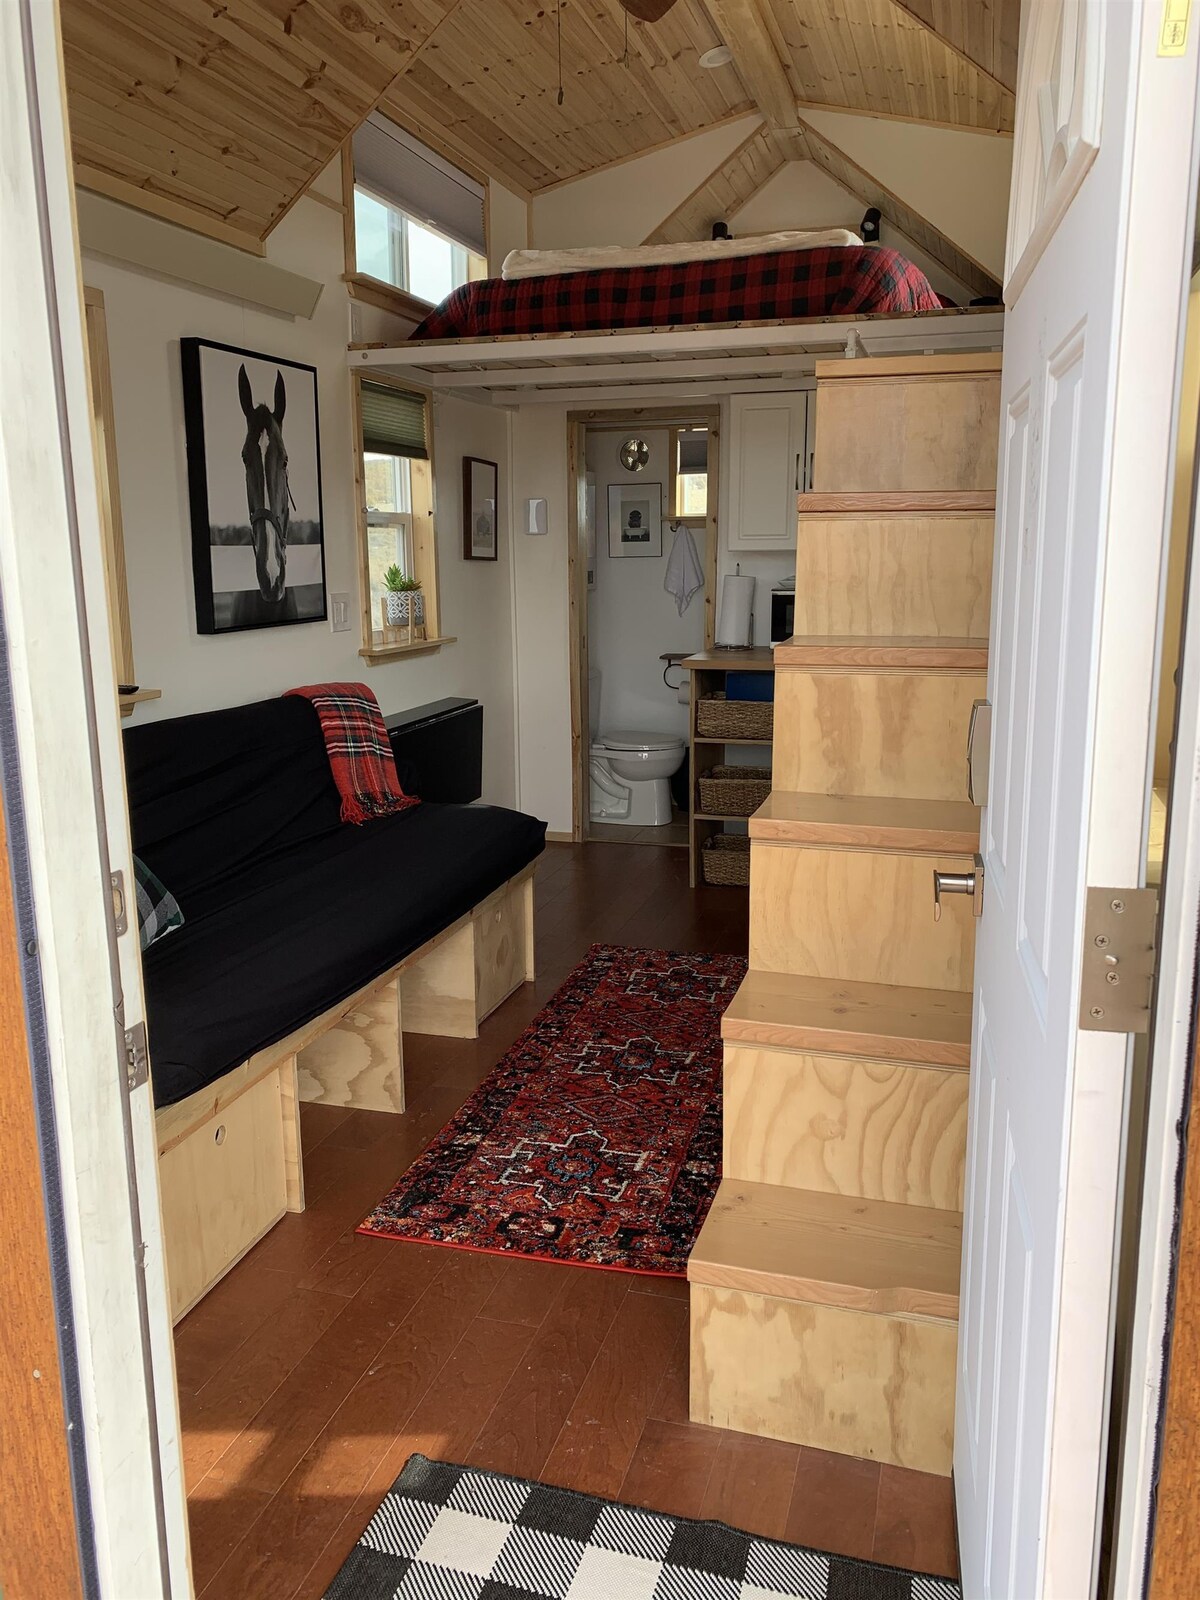 Hidden Valley Tiny Home at Trail and Hitch